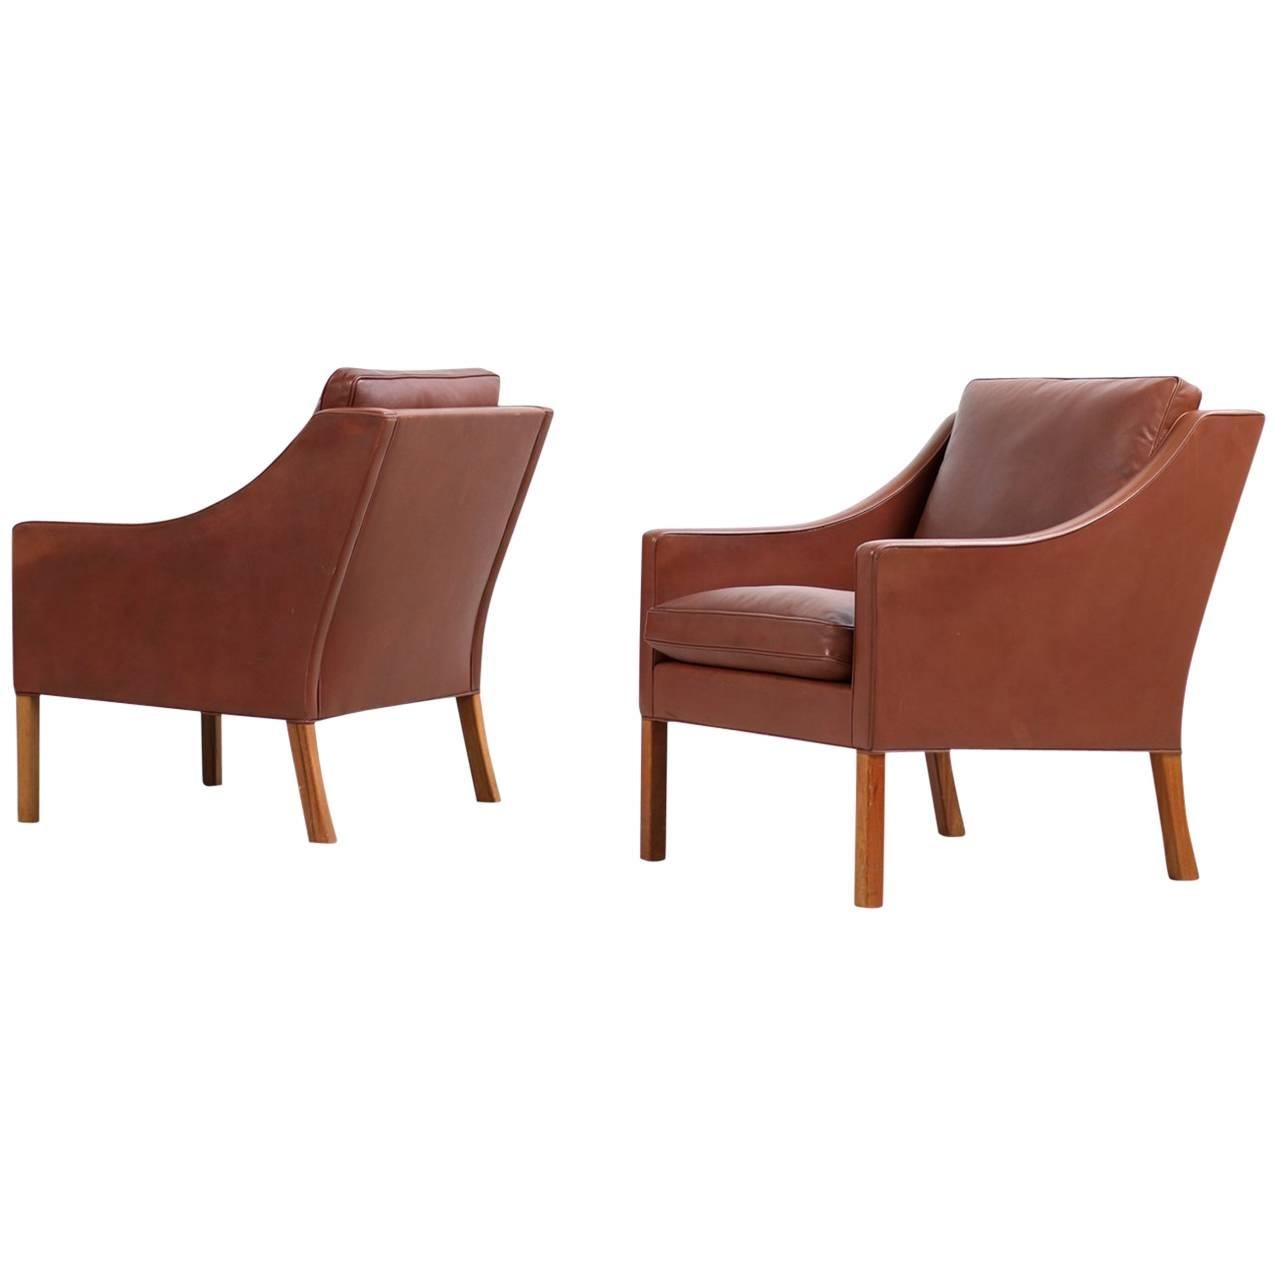 Pair of 1960s Borge Mogensen Mod. 2207 Leather Lounge Chairs Fredericia, Denmark